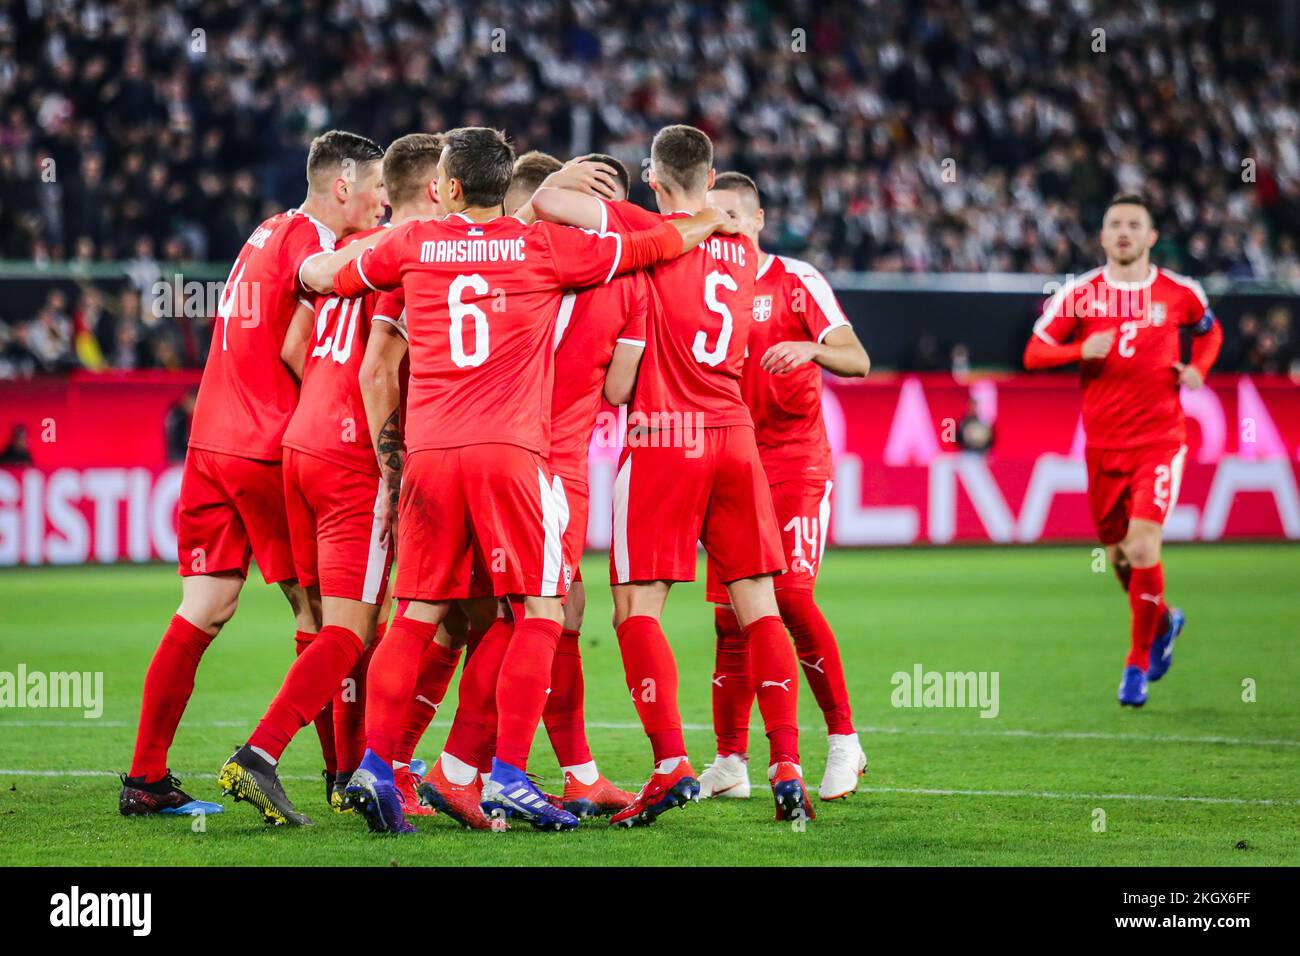 Wolfsburg, Germany, March 20, 2019: Serbian national team celebrating a goal during the international soccer game Germany vs Serbia Stock Photo